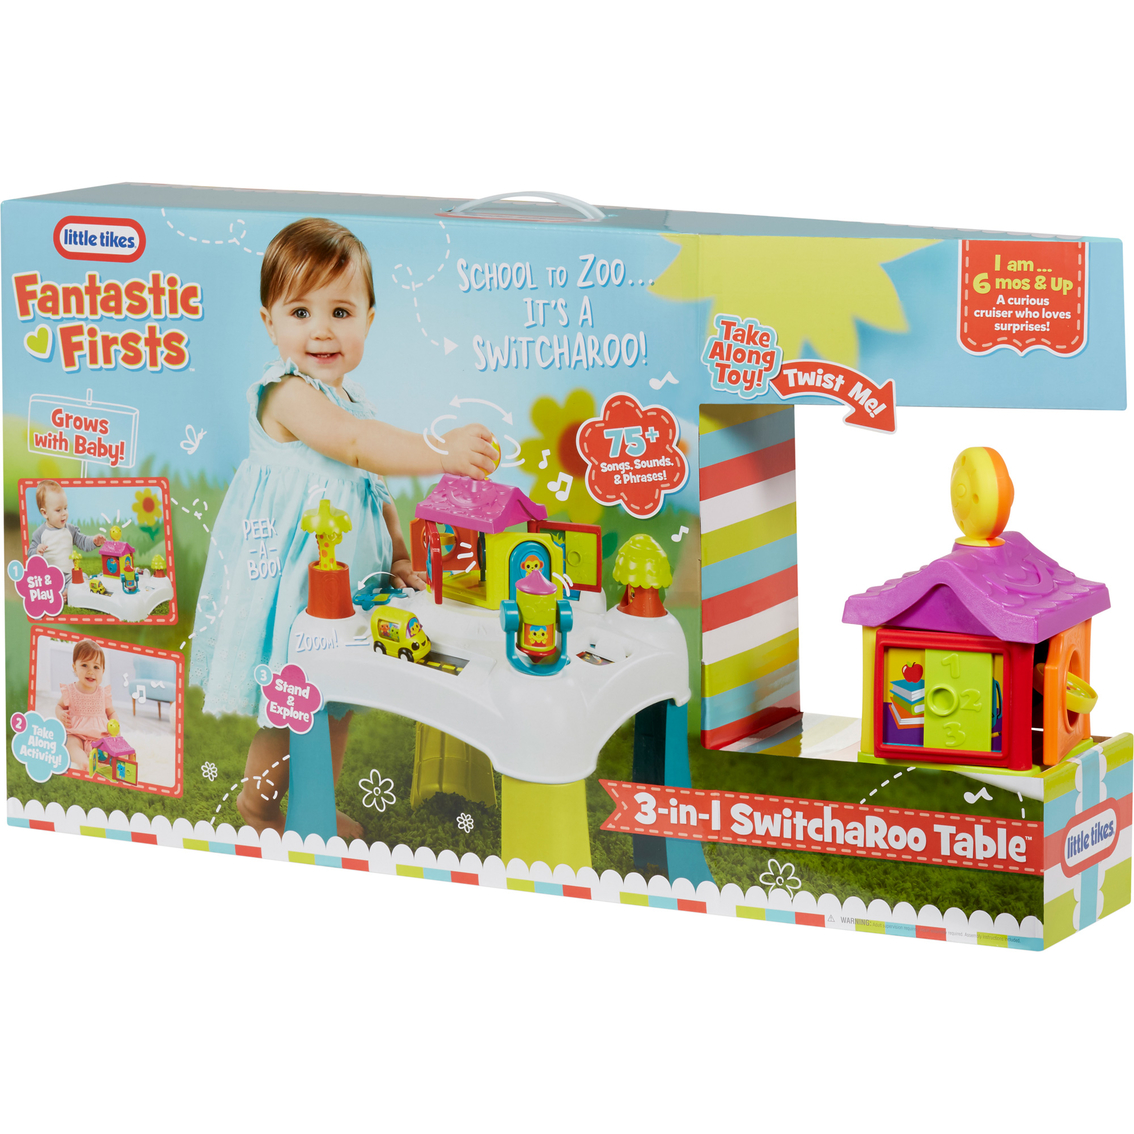 Little Tikes Fantastic Firsts 3 In 1 Switcharoo Table Learning